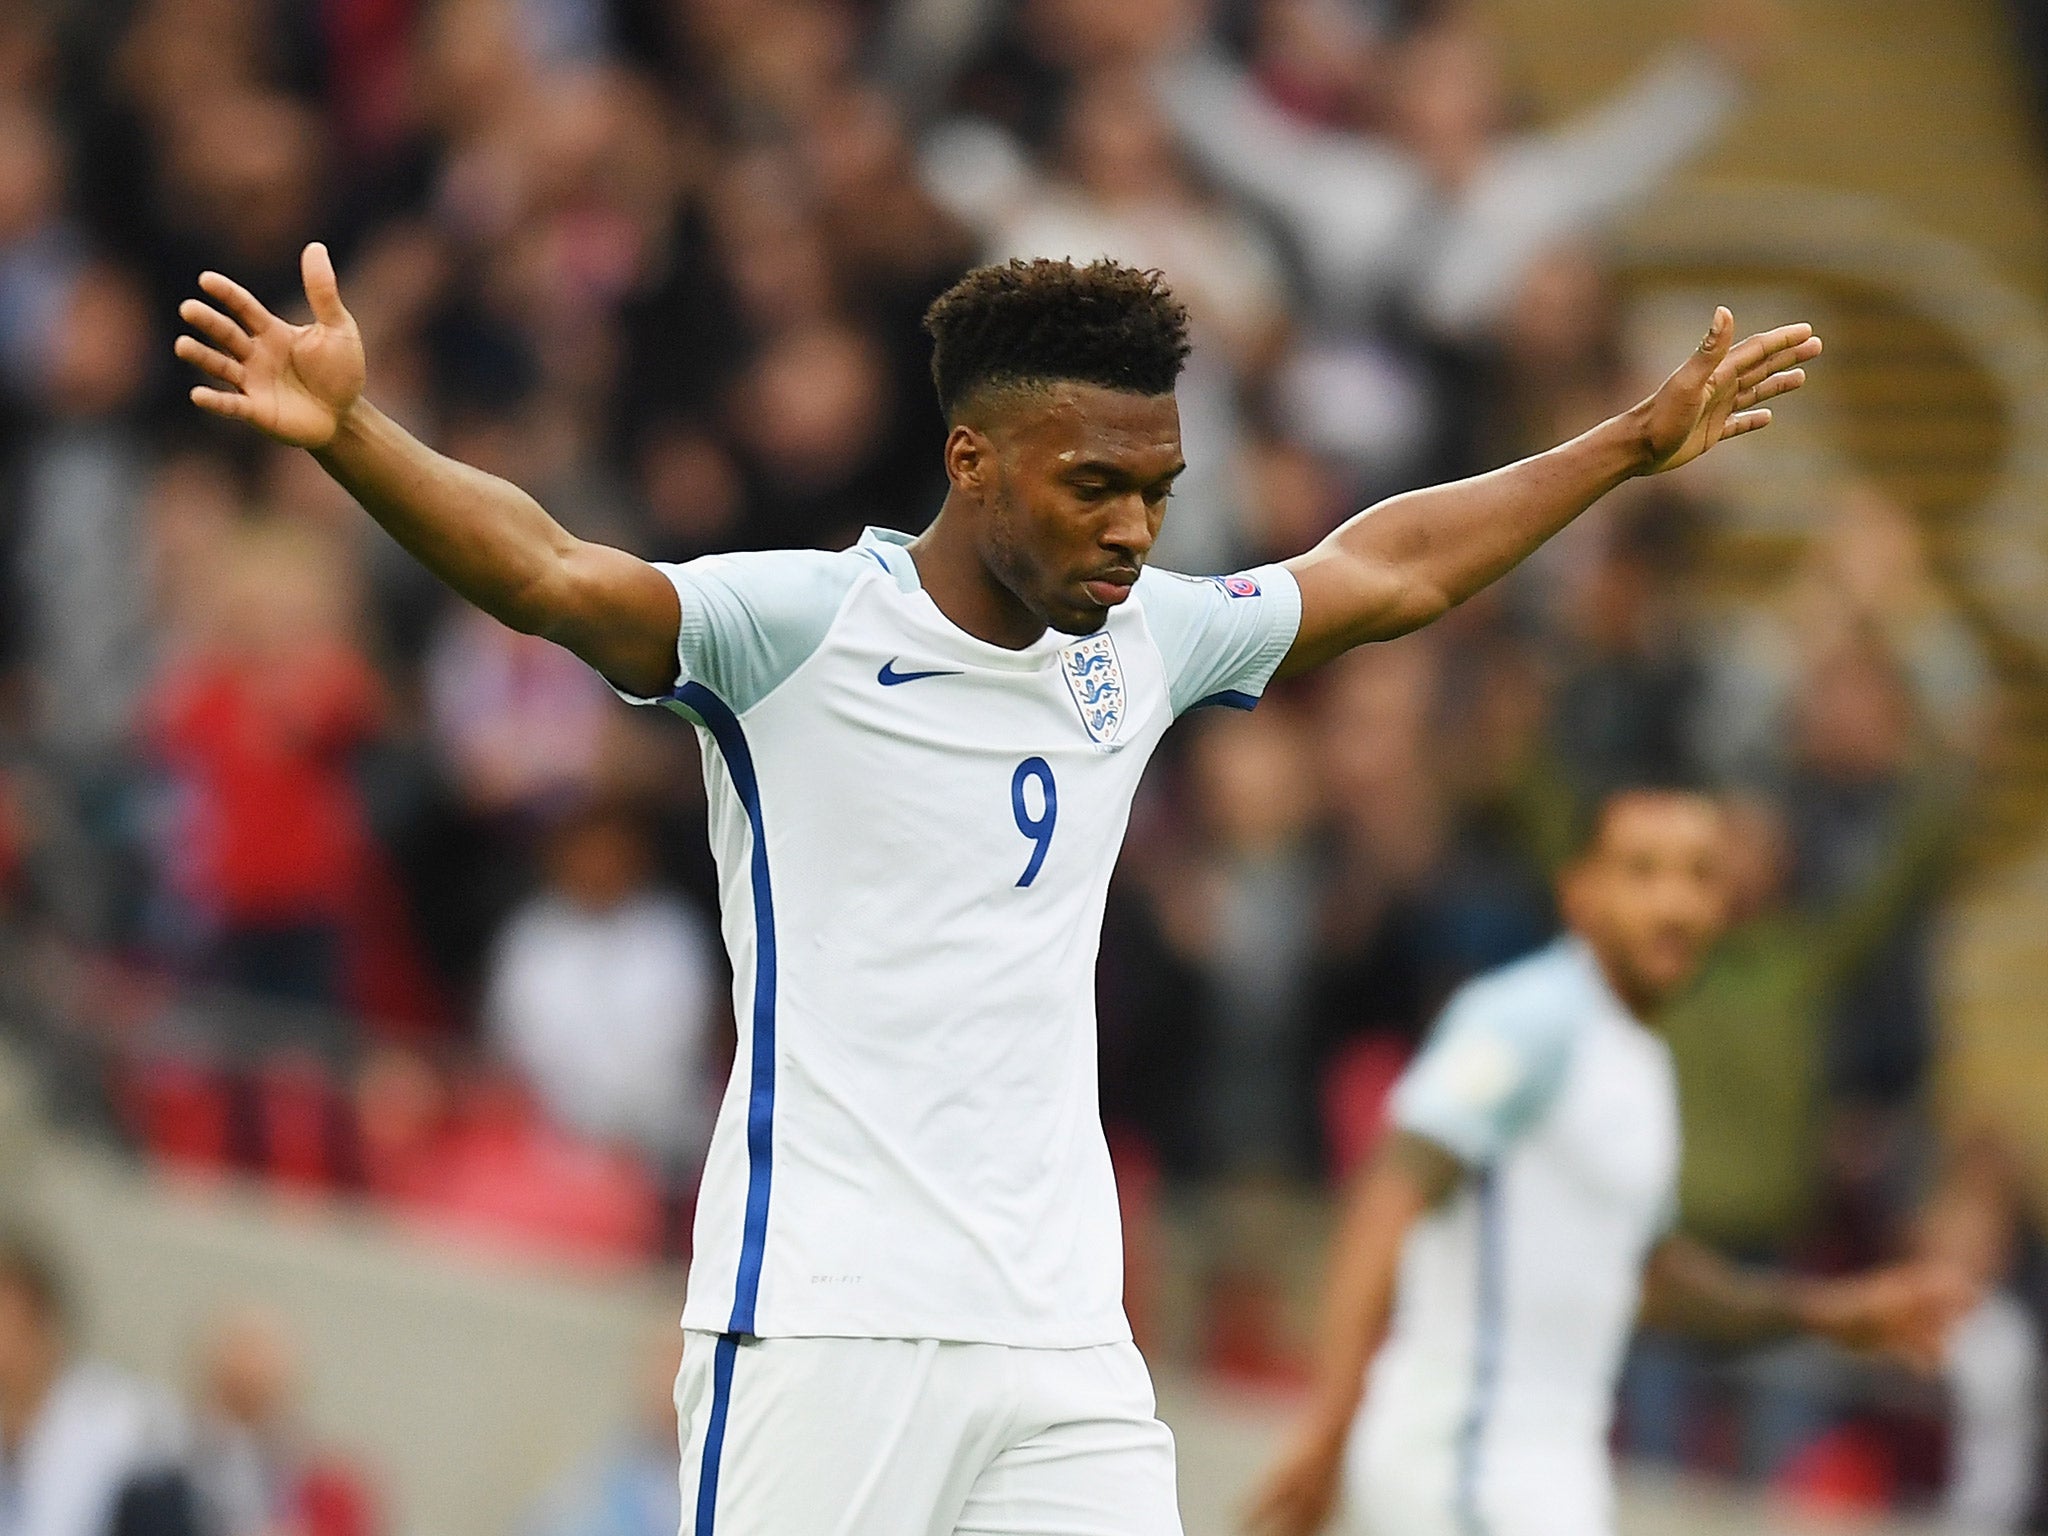 Daniel Sturridge provided a timely reminder to Jurgen Klopp about his abilities in scoring for England against Malta